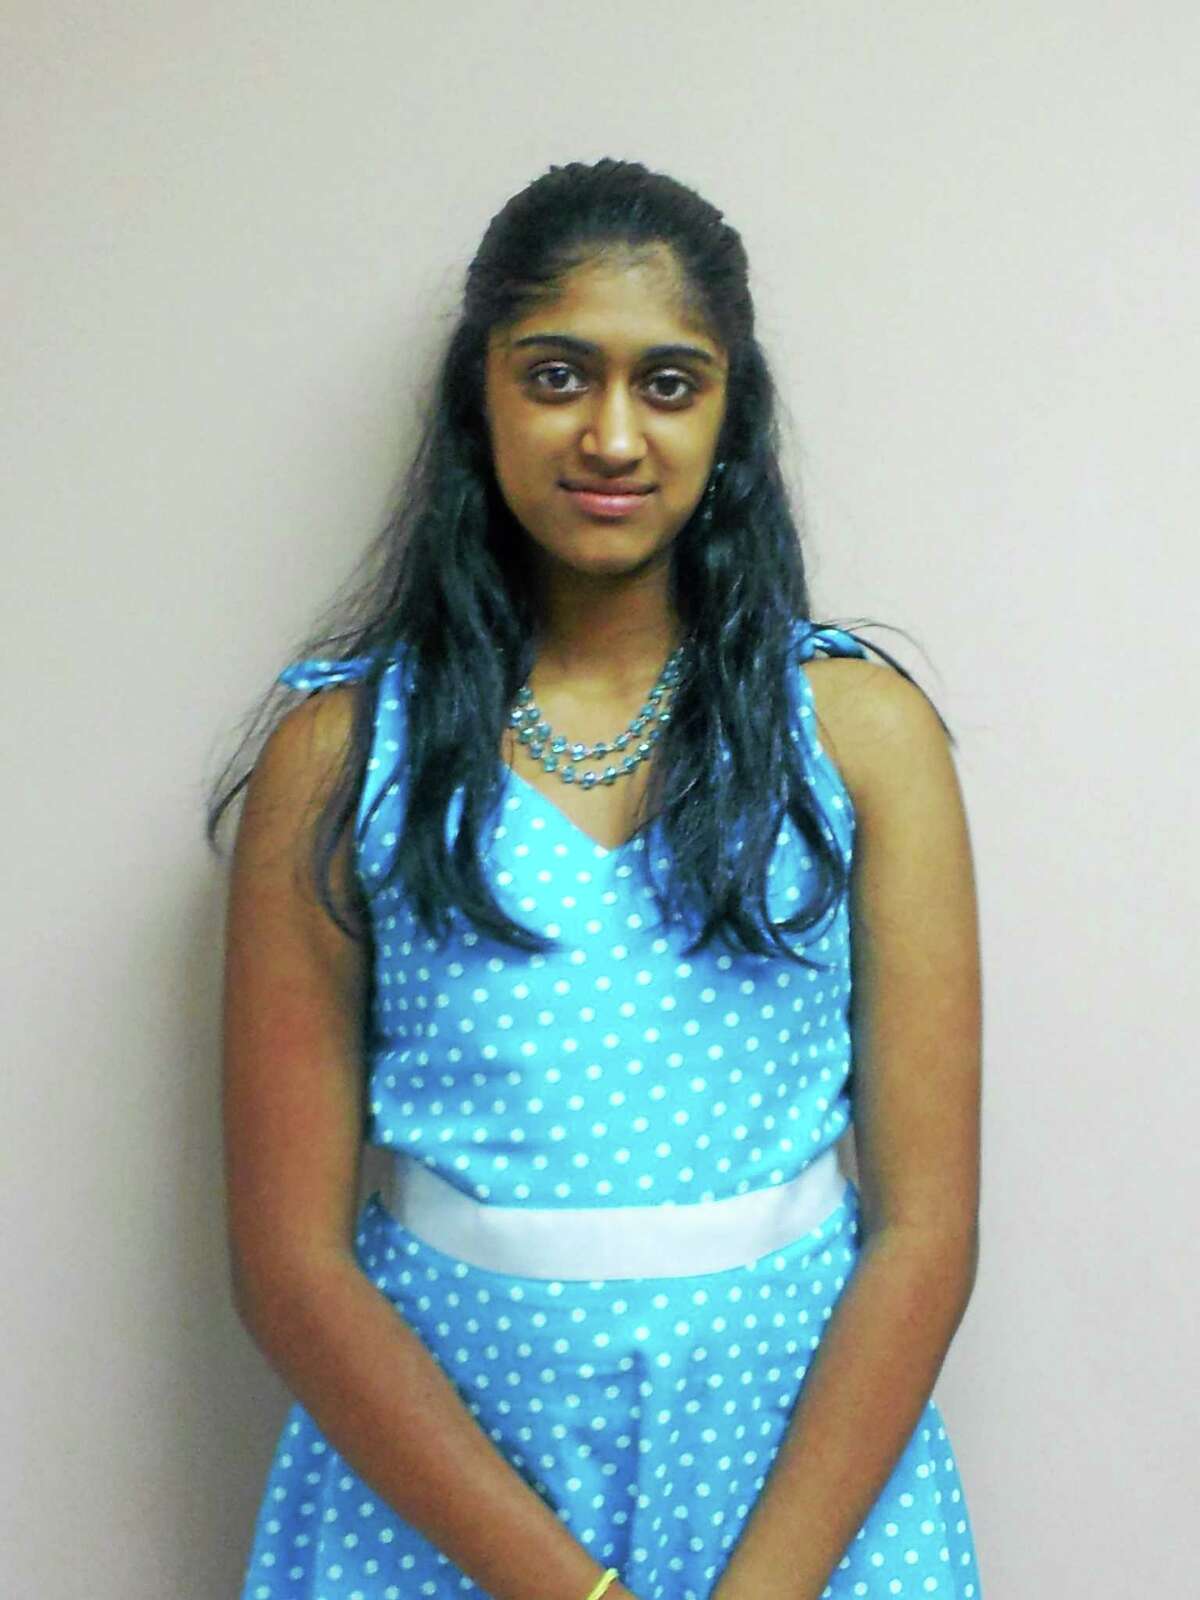 Deepika Ravichandran, 15, of East Hampton has won the Guinness World Record to become the fastest puzzler.